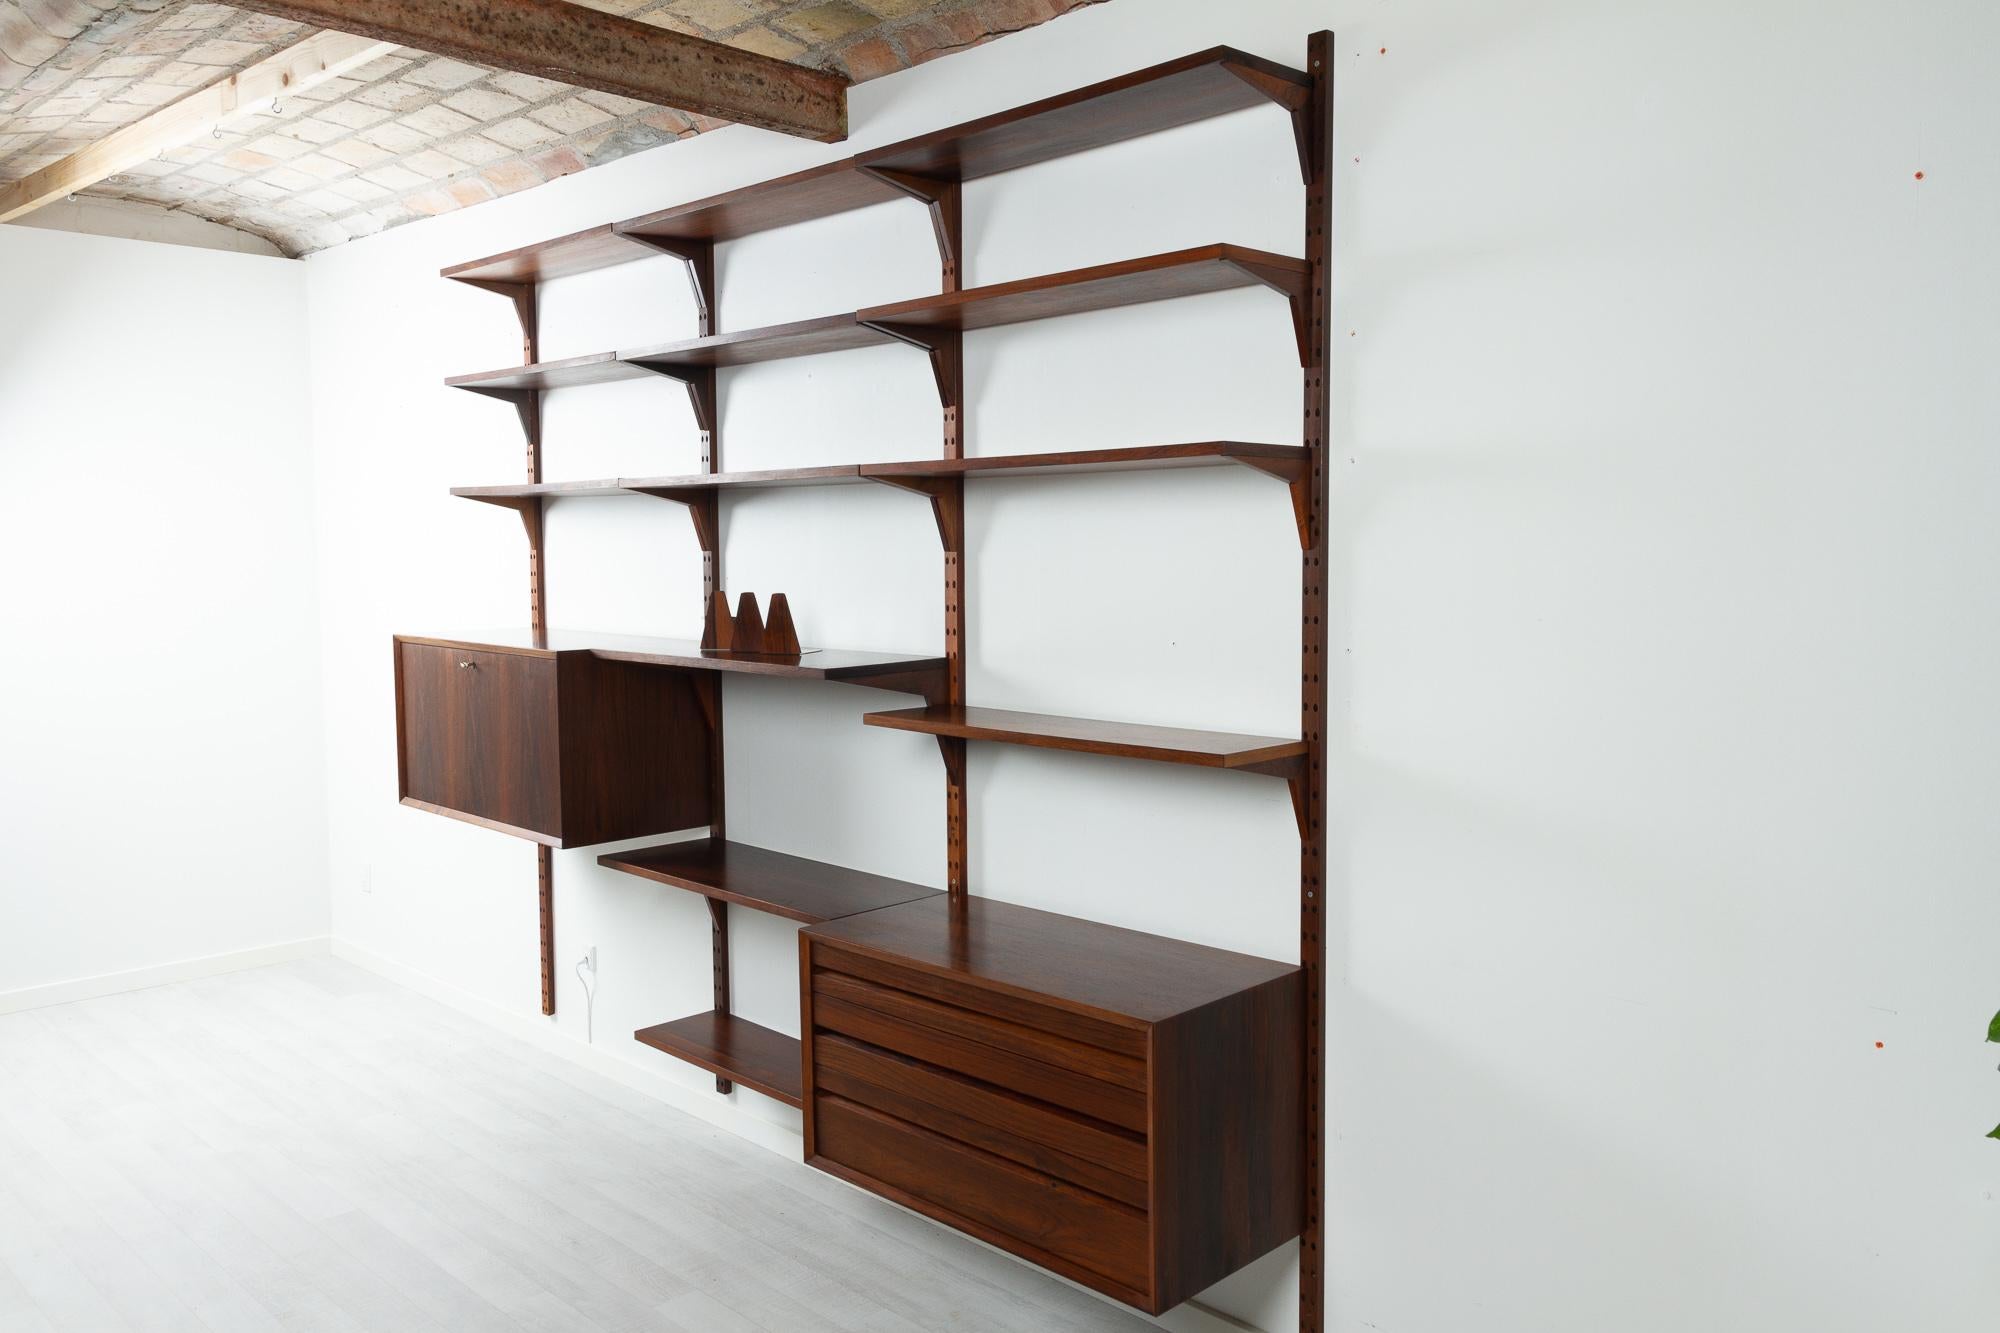 Vintage Danish rosewood modular wall unit by Poul Cadovius for Cado 1960s

Mid-Century Modern 3 bay shelving system model Cado. This is a original vintage floating bookcase designed by Danish architect Poul Cadovius. 
Cadovius had the